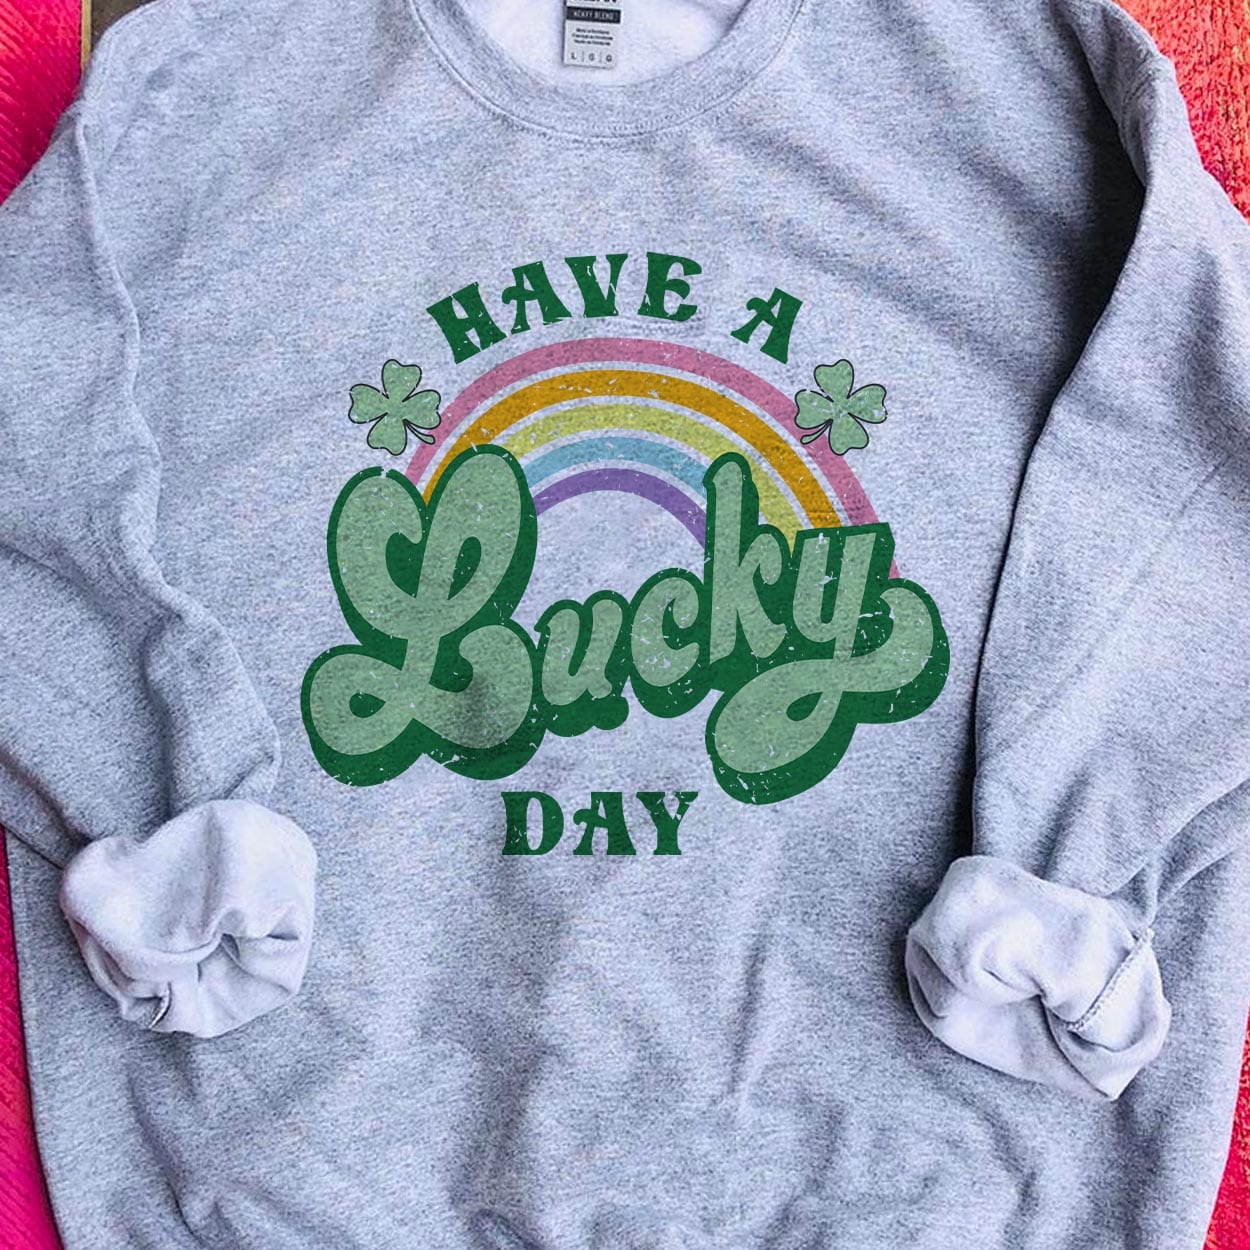 A gray crew neck sweatshirt featuring the words "Have a lucky day" with a rainbow going through the middle with clovers. The word "lucky" is in cursive and a larger font. Item is pictured in a pink background.